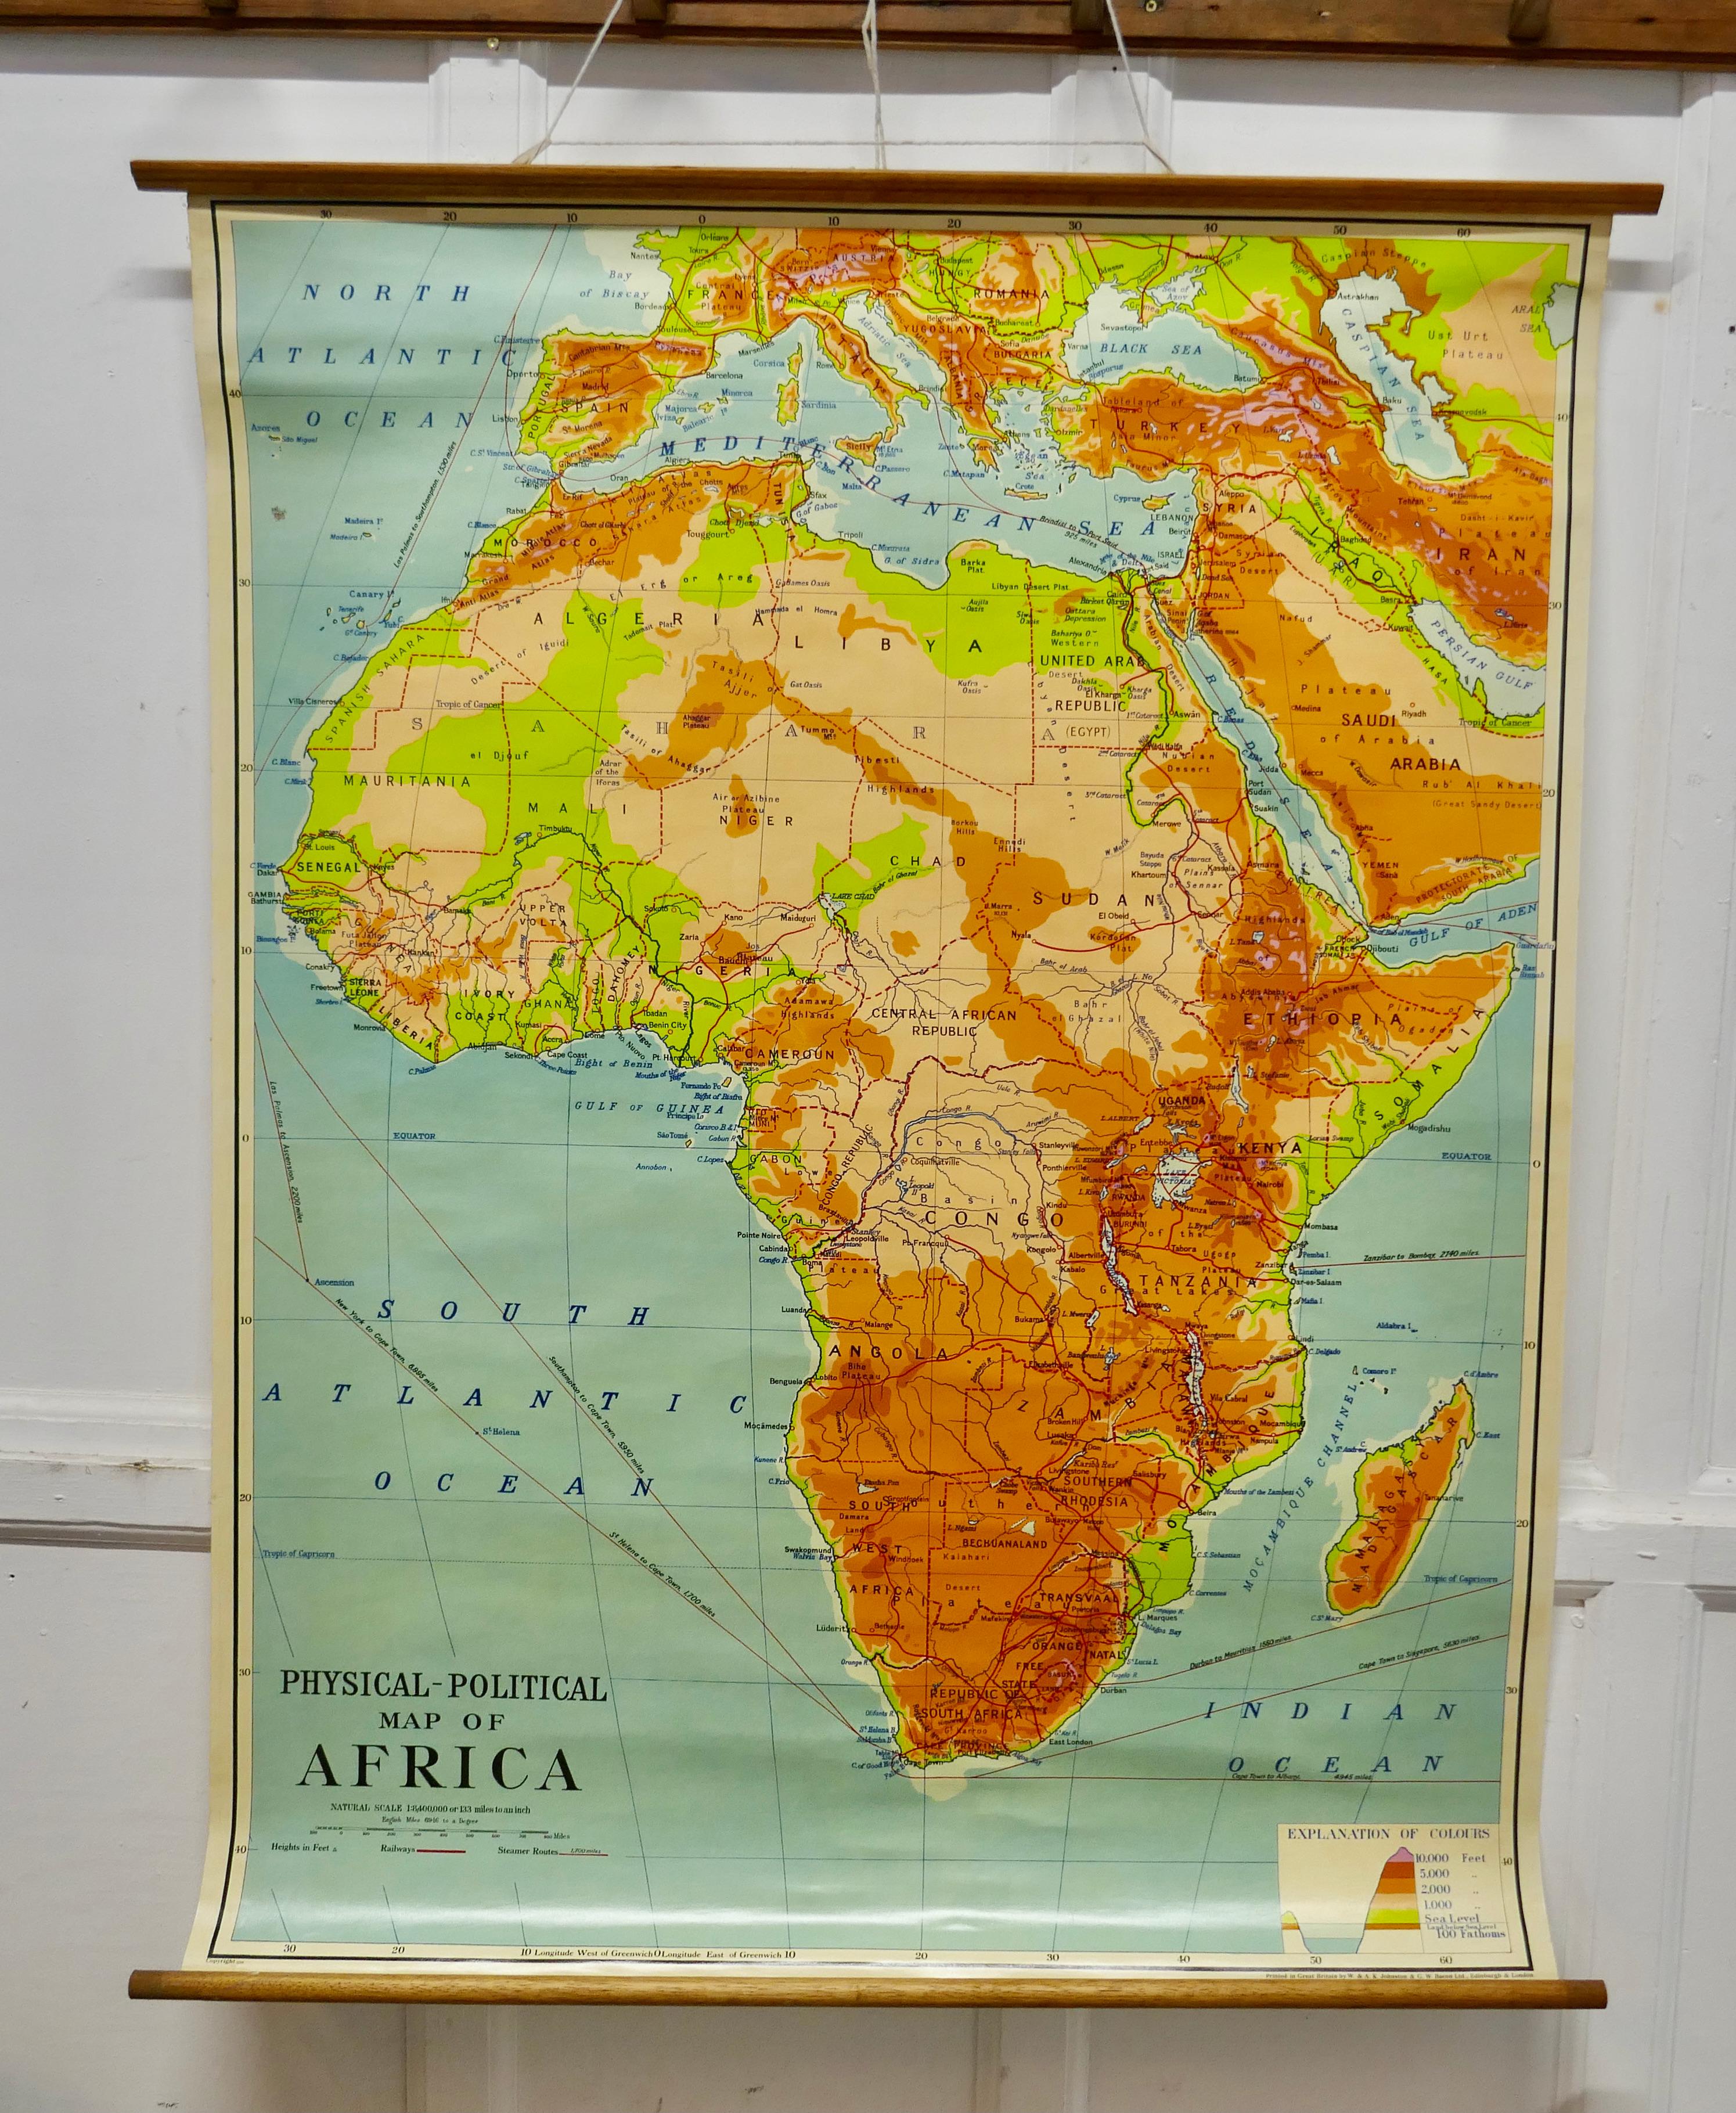 Large University chart “Africa Physical Political” by Bacon

W&A K Johnston’s charts of physical maps by G W Bacon,

This is a Physical Political map of Africa, it is lithograph set on Linen mounted on wooden rods, the chart is in very good